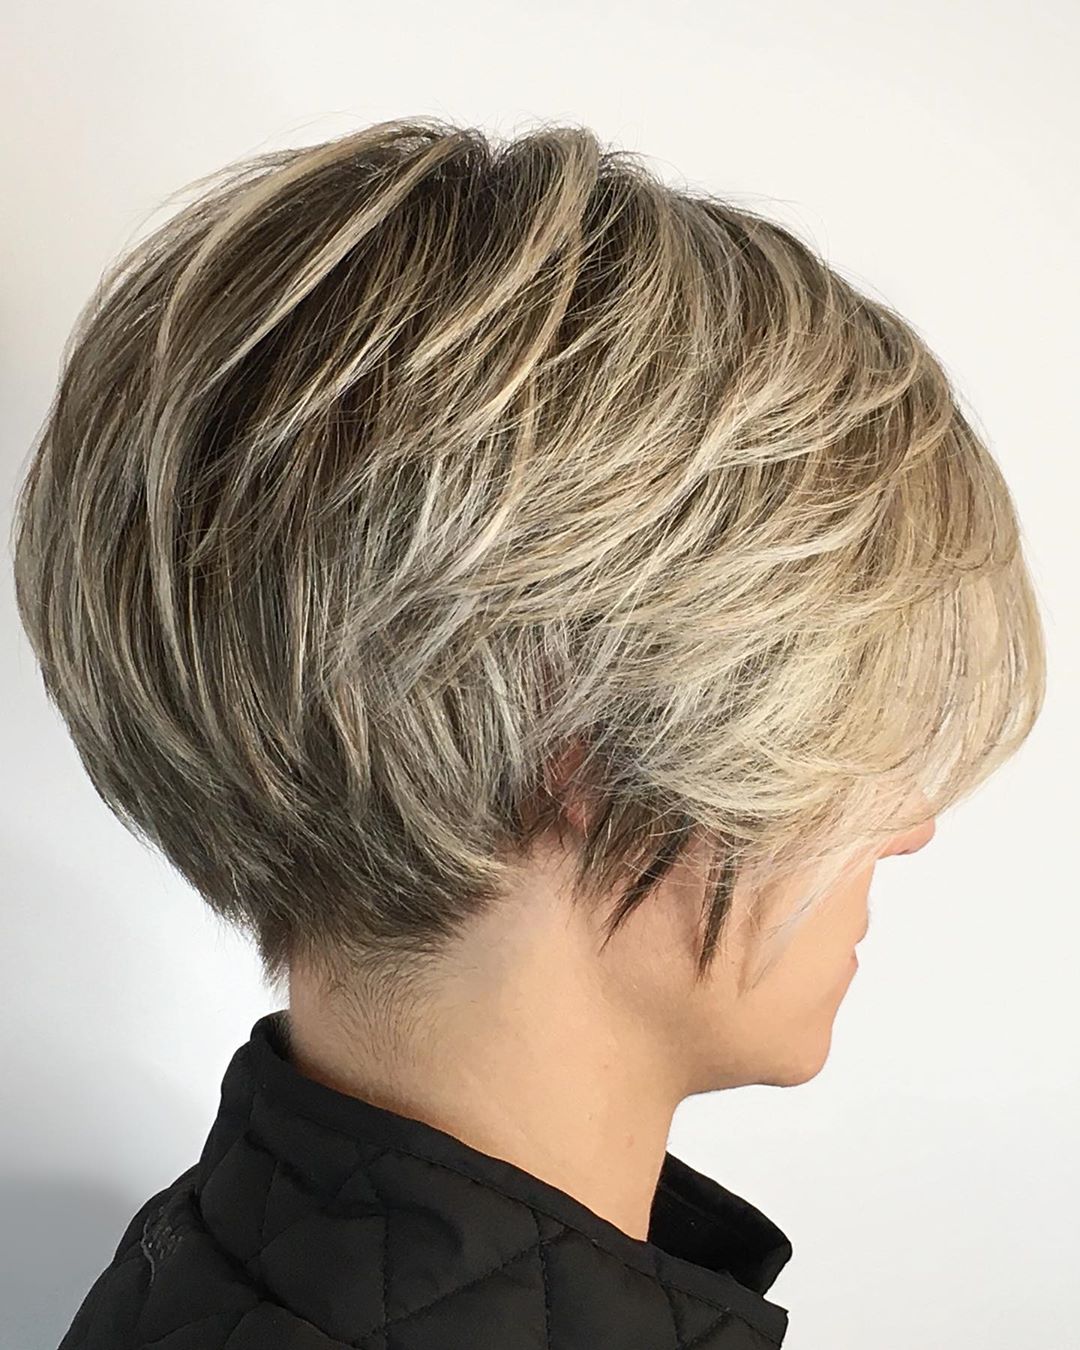 Inverted Blonde Bob with Short Layers and Fringe